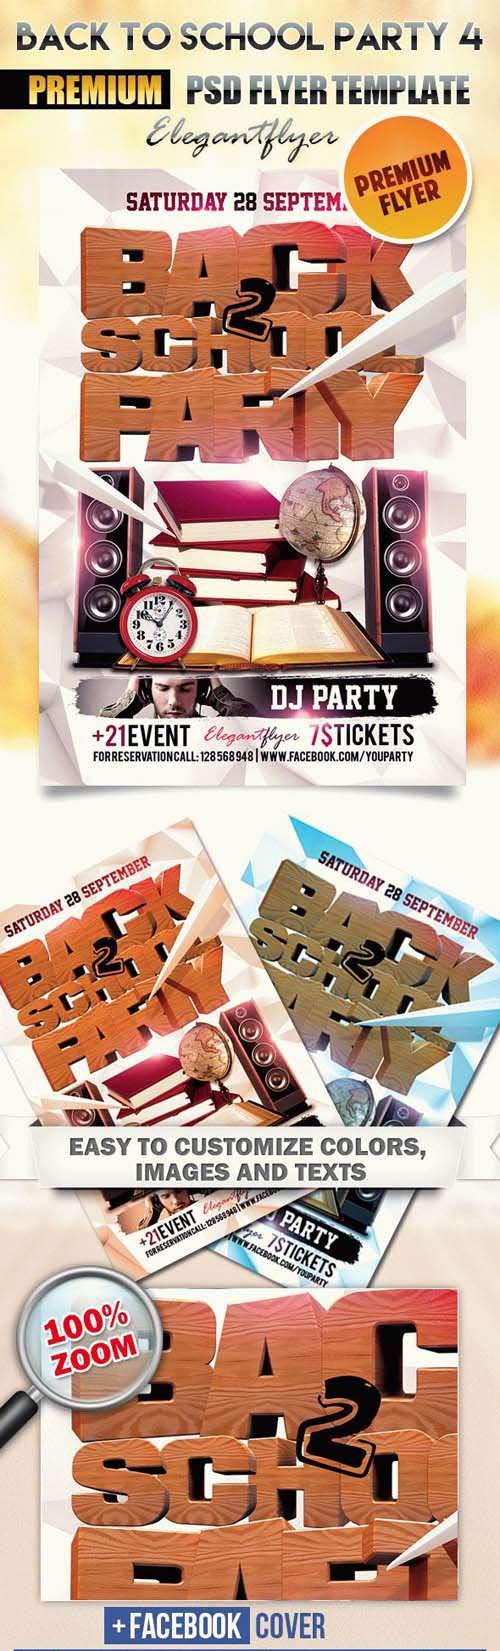 Back to School Party 4 PSD Flyer